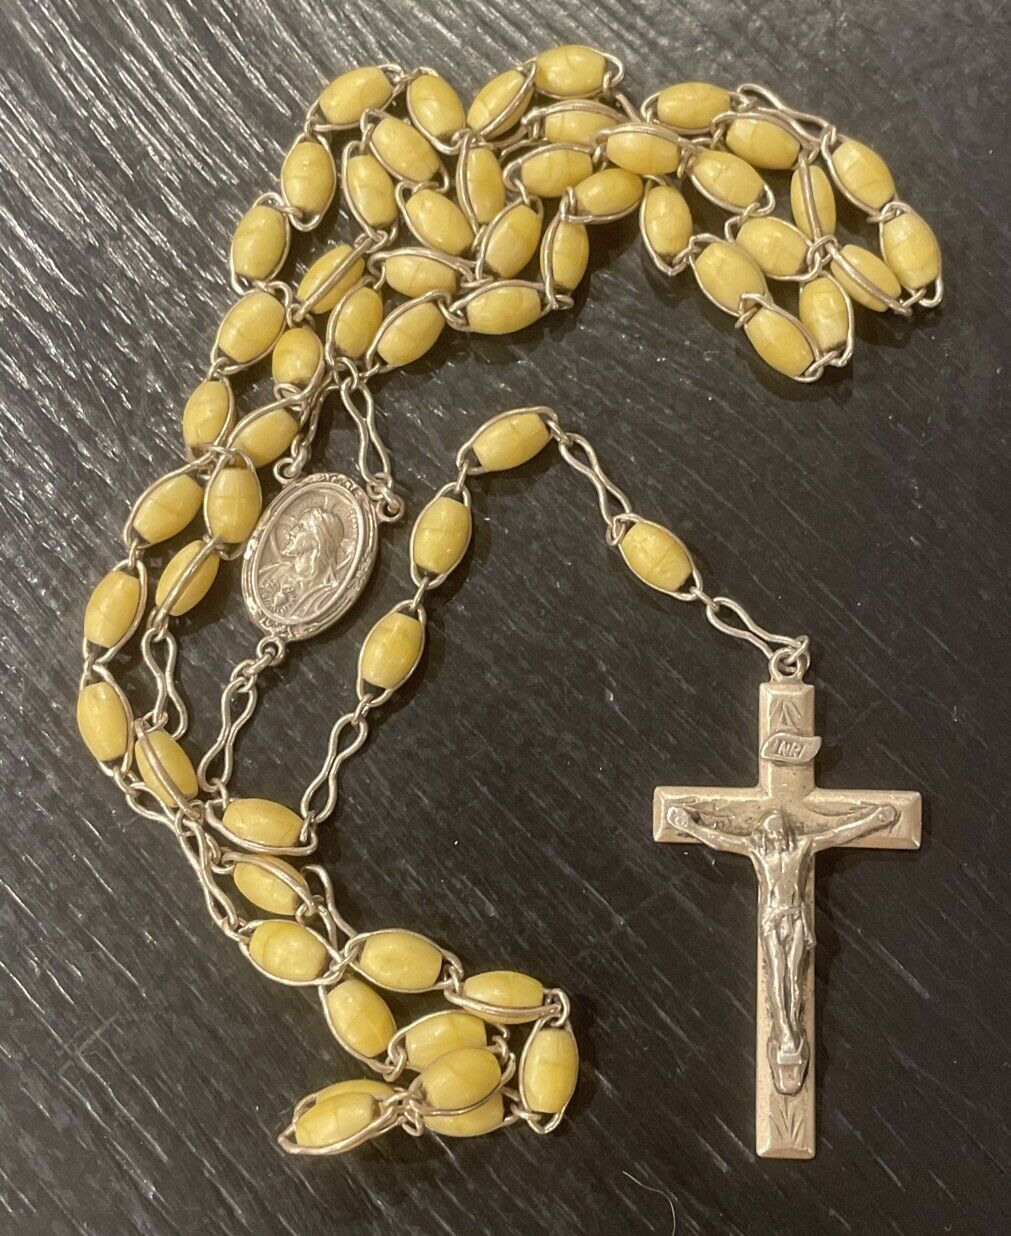 Vintage Sterling Silver & Cream Colored Rosary 21” Long